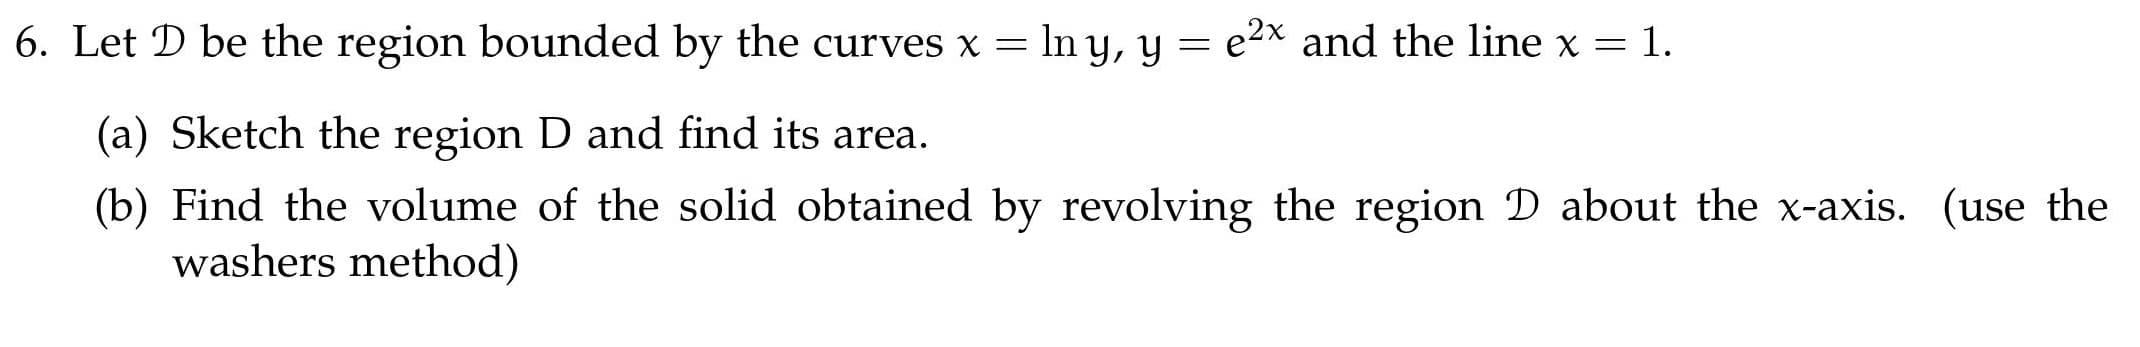 6. Let D be the region bounded by the curves x = In y, y = e2x and the line x = 1.
(a) Sketch the region D and find its area.
(b) Find the volume of the solid obtained by revolving the region D about the x-axis. (use the
washers method)
